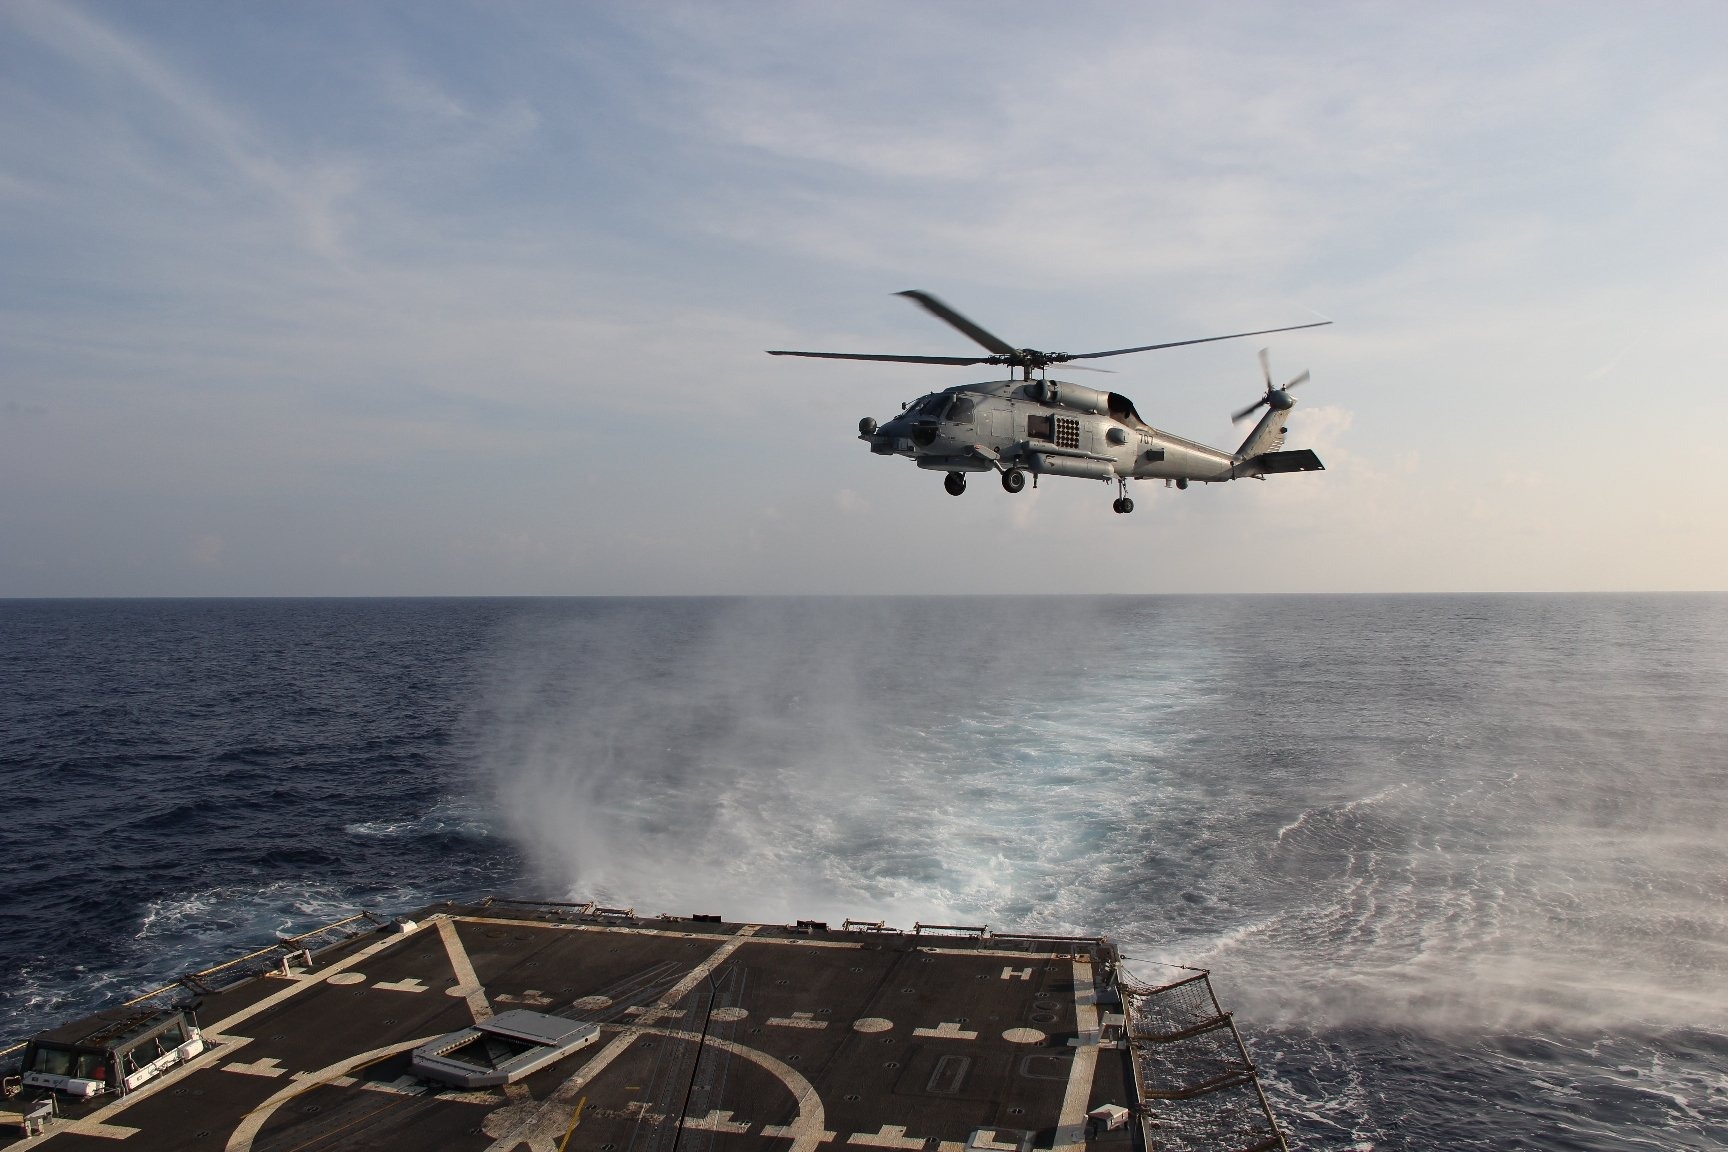 A Sea Hawk helicopter departs from USS Pinckney to search for the missing Malaysia Airlines flight on March 9, 2014.